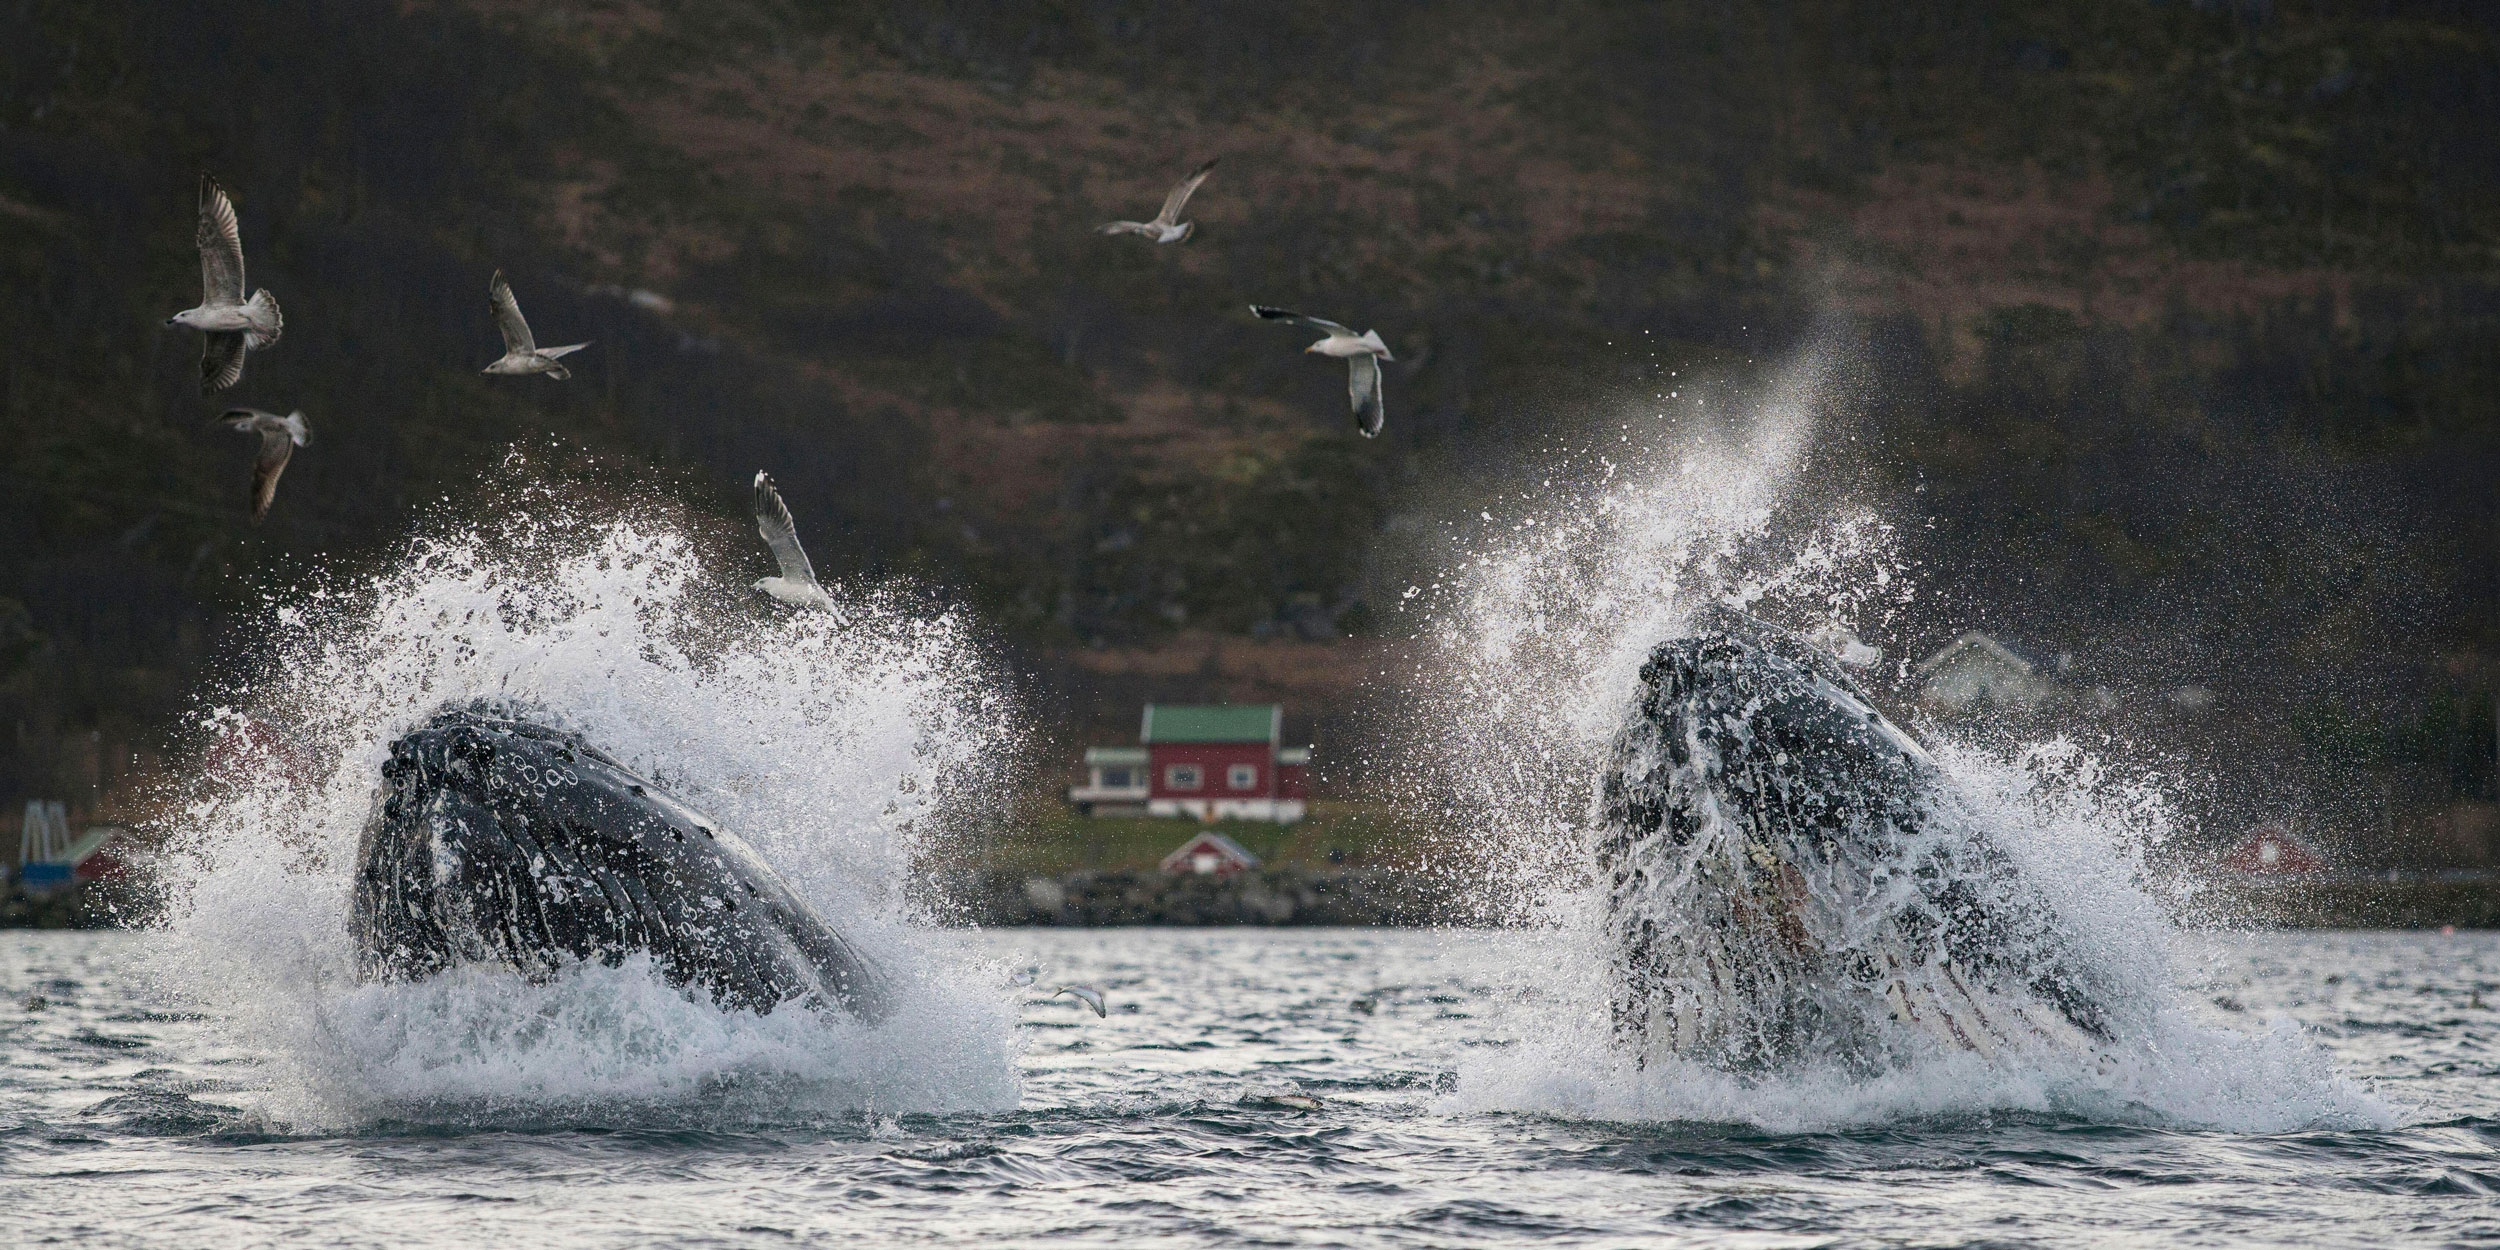 Humpback whales breach the surface of the water, creating big plumes of whitewater. Hills and small houses are visible in the background.